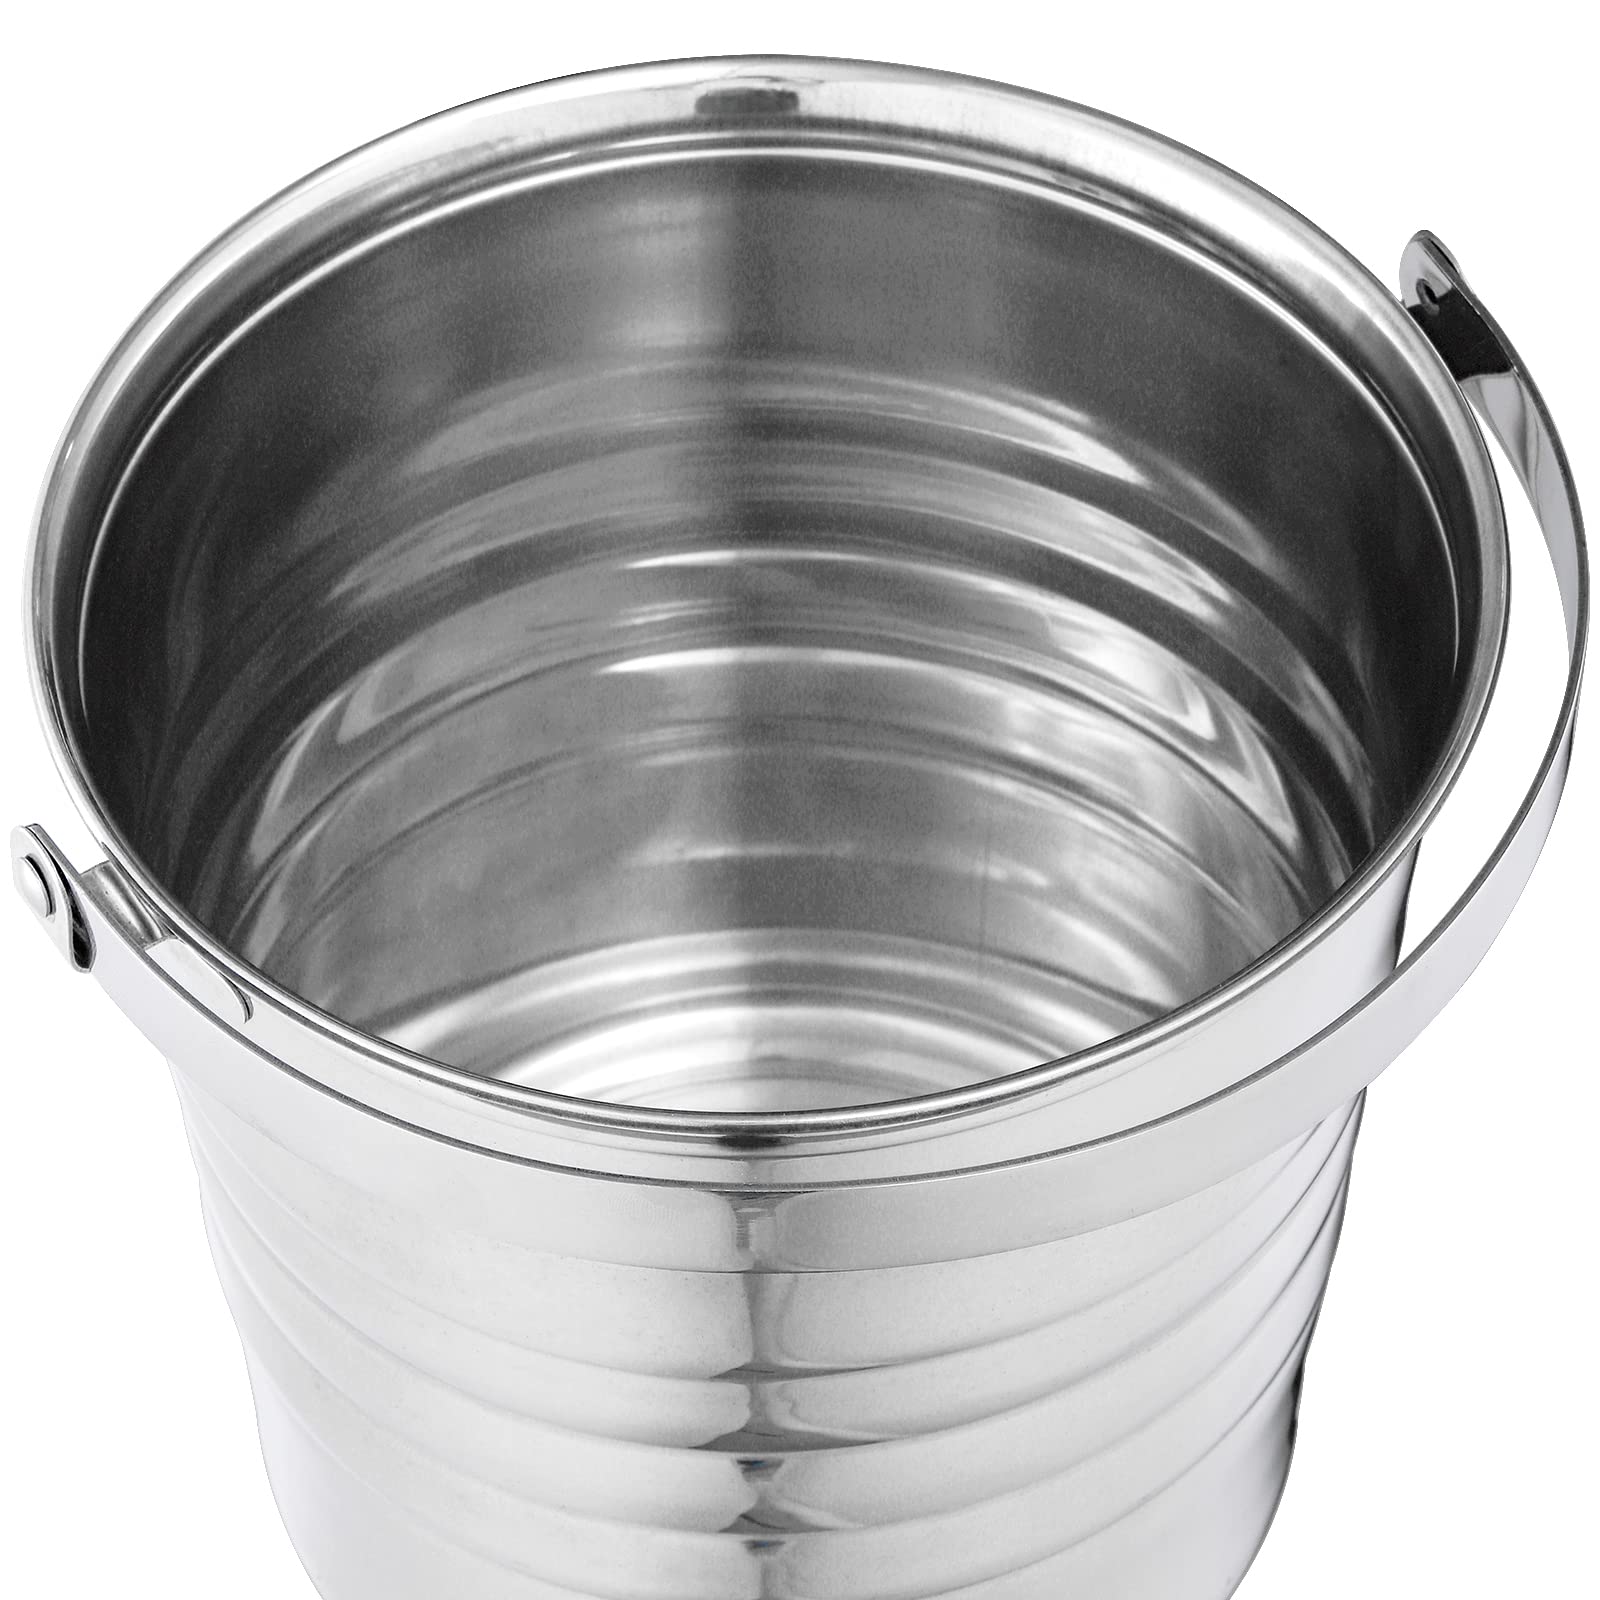 Elsjoy 3 Quart Stainless Steel Ice Bucket with Handle, Champagne Bucket Wine & Beer Chiller Metal Beverage Tub for Drinking, Bar, Party, Picnic